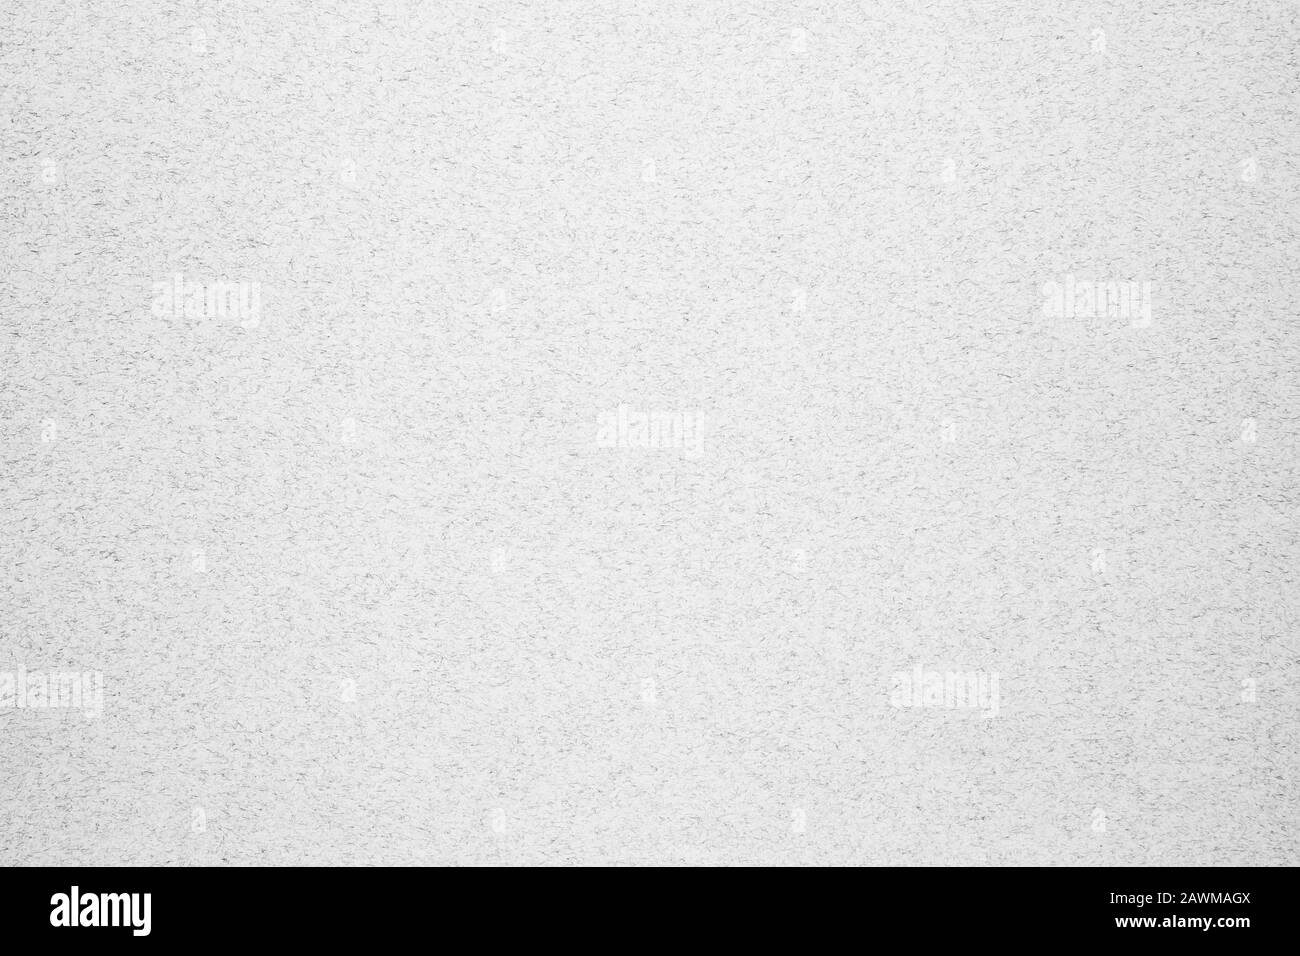 Textured paper Black and White Stock Photos & Images - Alamy